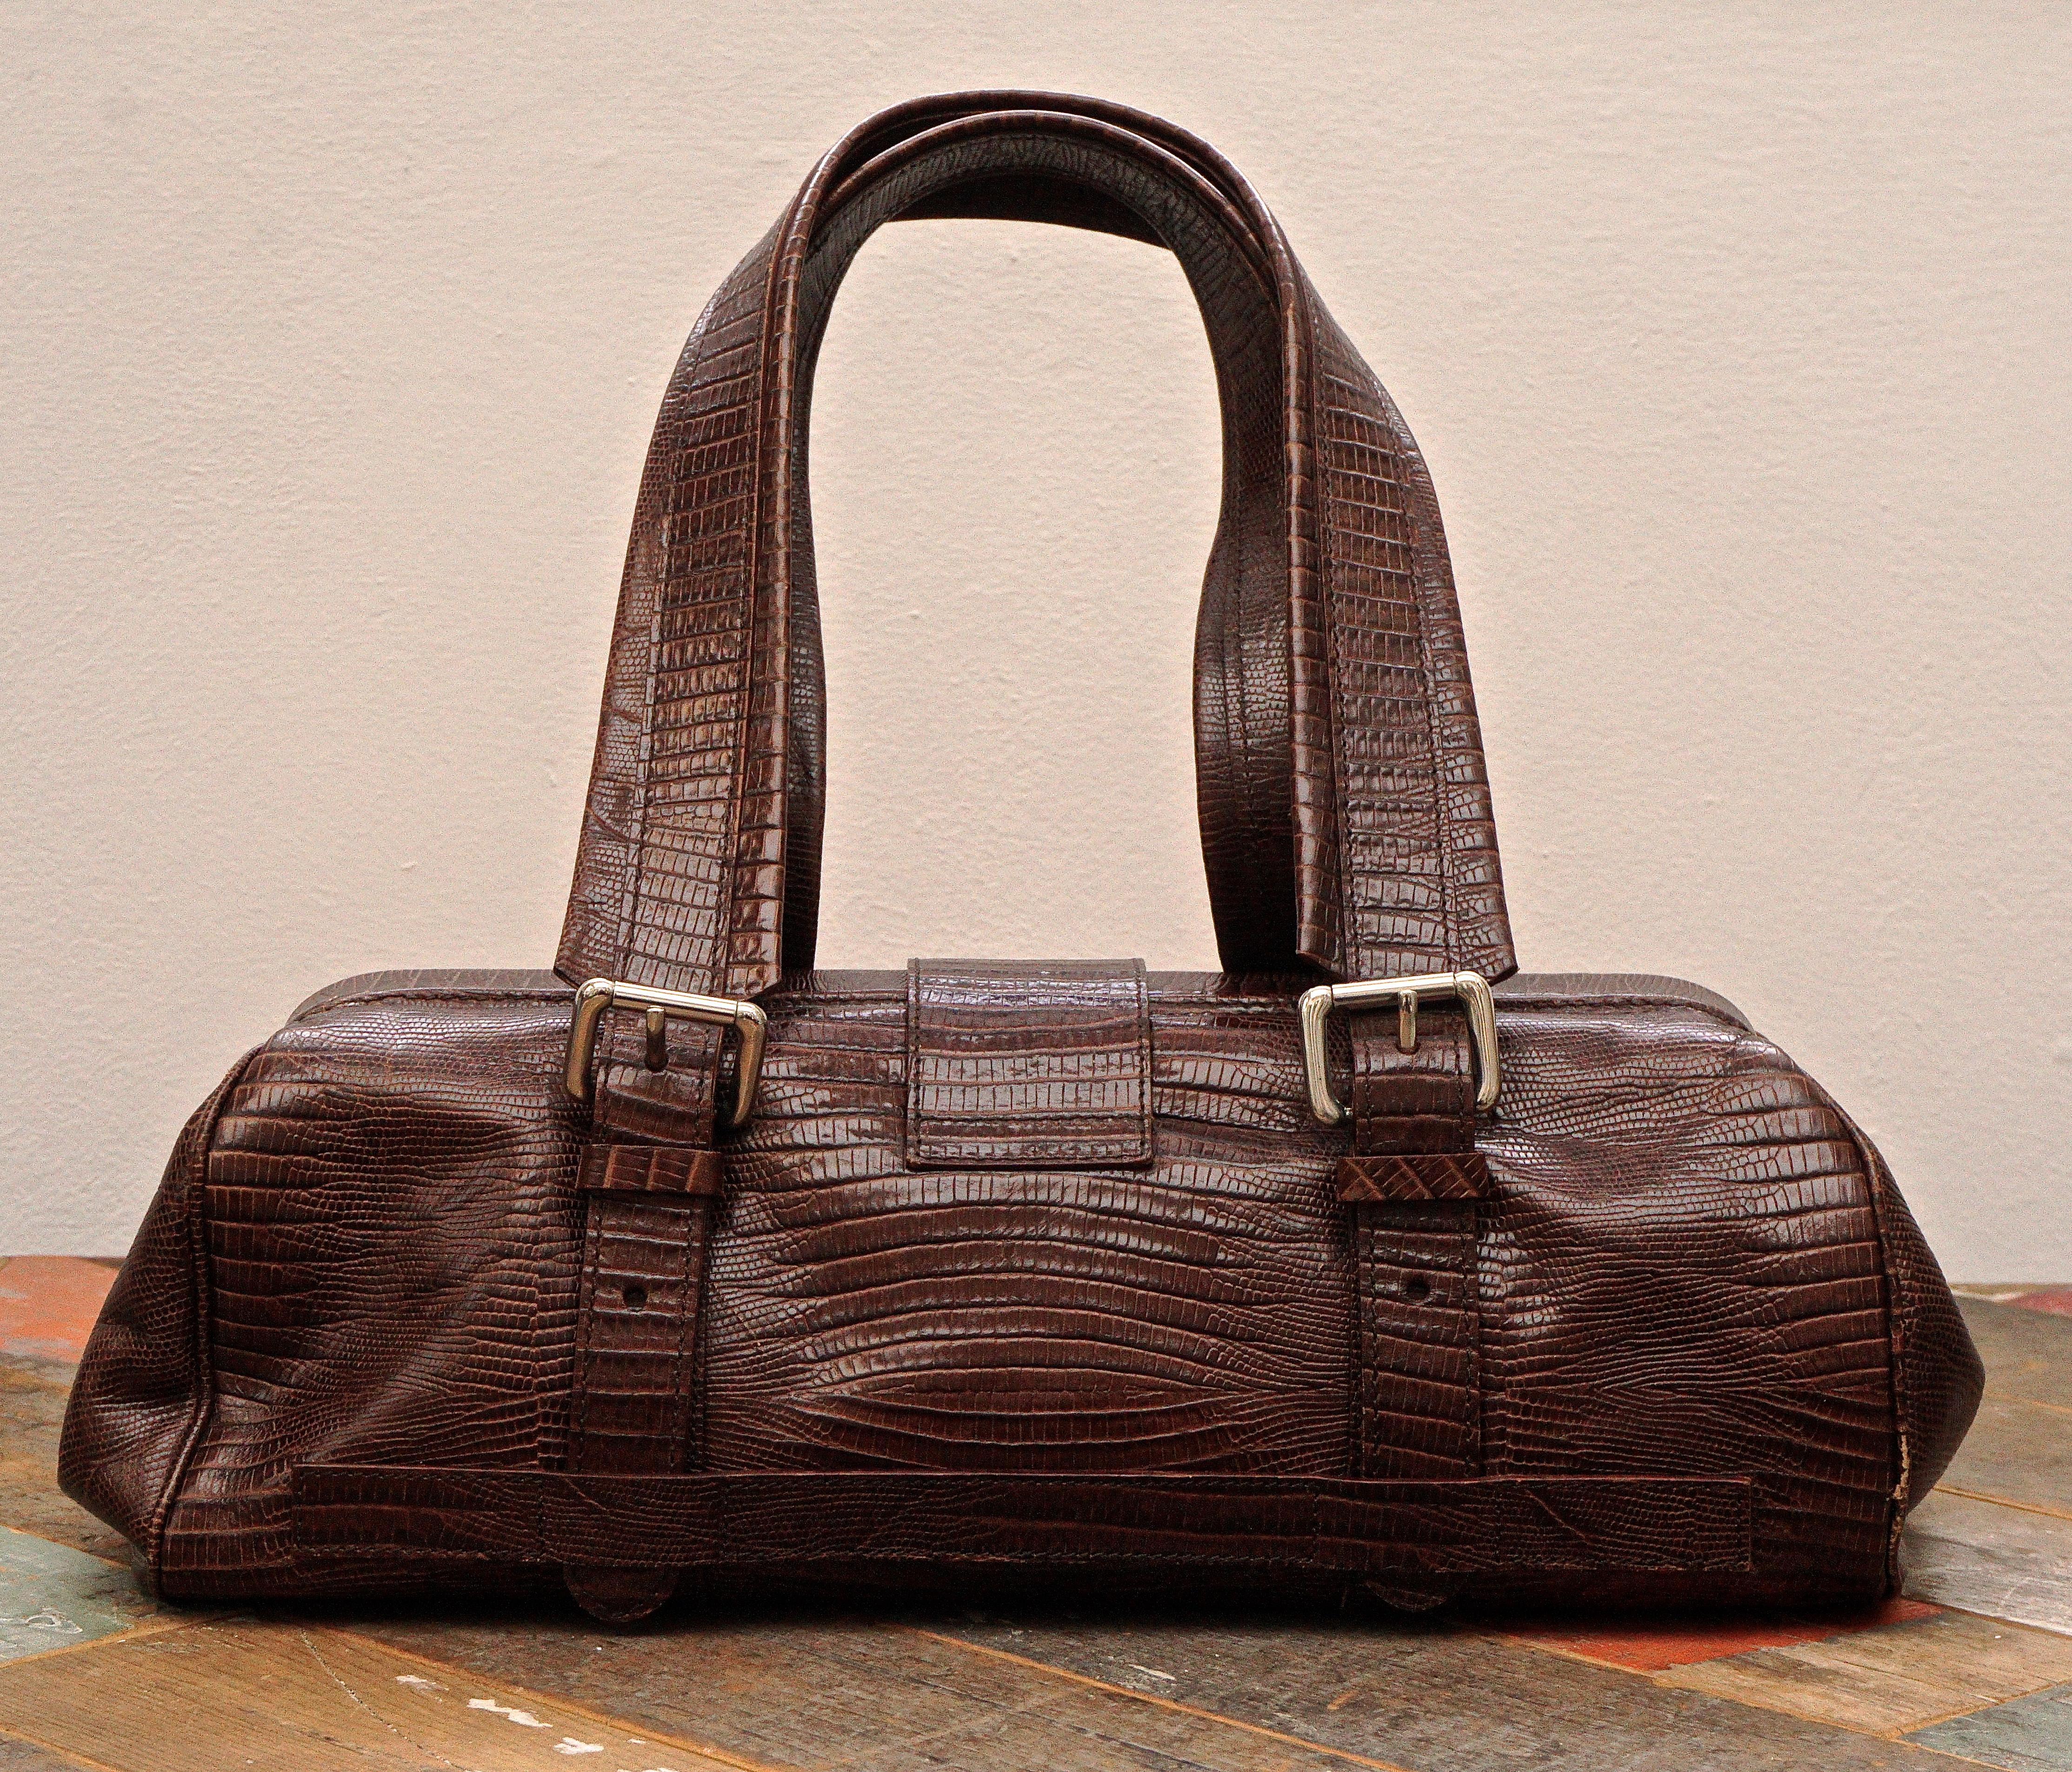 Liberty weekender bag in mid brown faux crocodile leather. Made in Italy.  Measuring maximum length 35.5cm / 13.97 inches at the base, height approximately 12.7cm / 5 inches, and maximum depth approximately 16cm / 6.3 inches. It has silver tone